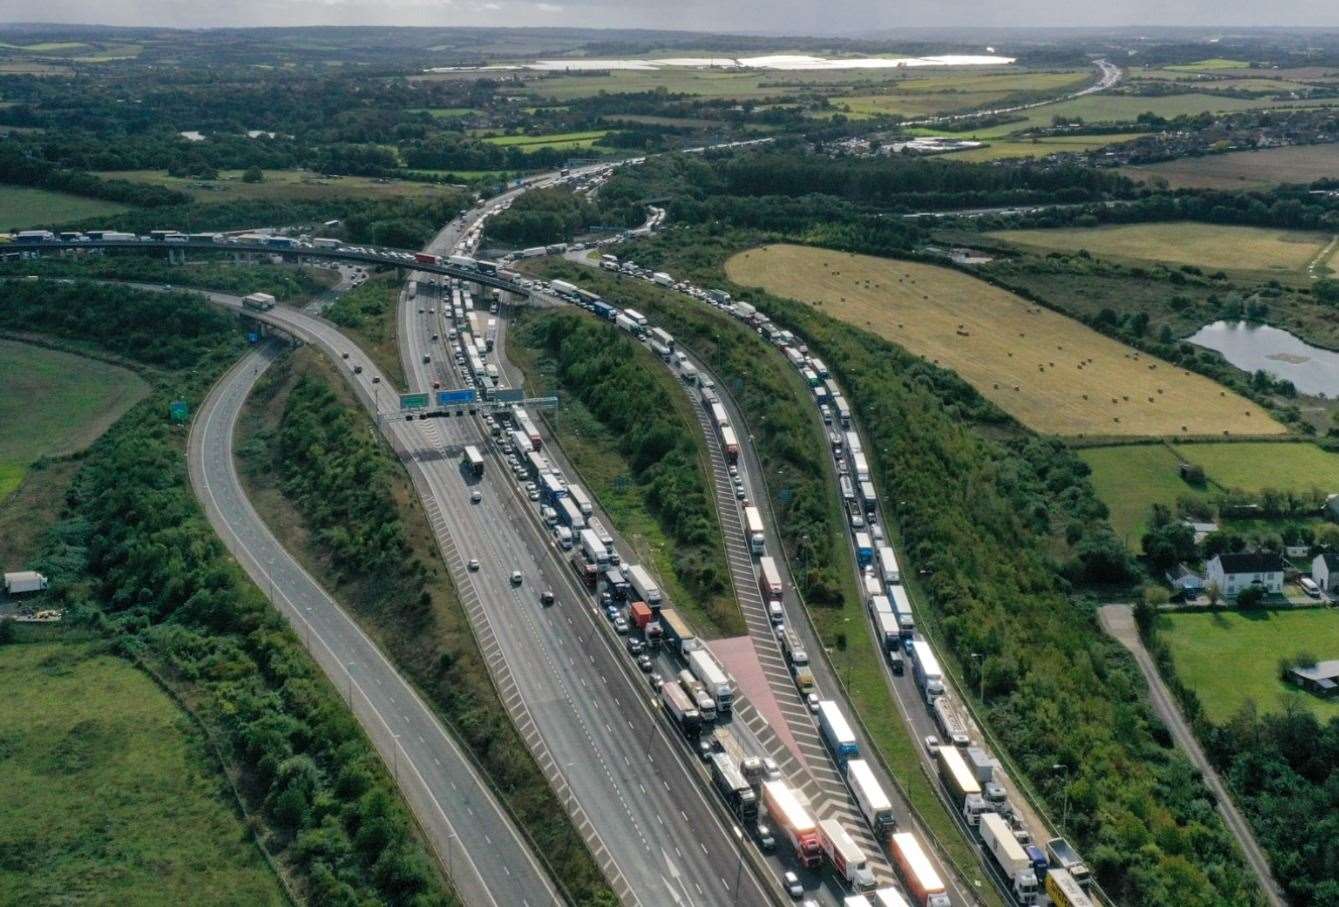 Long queues have formed on the approach to the Dartford Crossing and is adding to delays on the A2. Photo: UKNIP